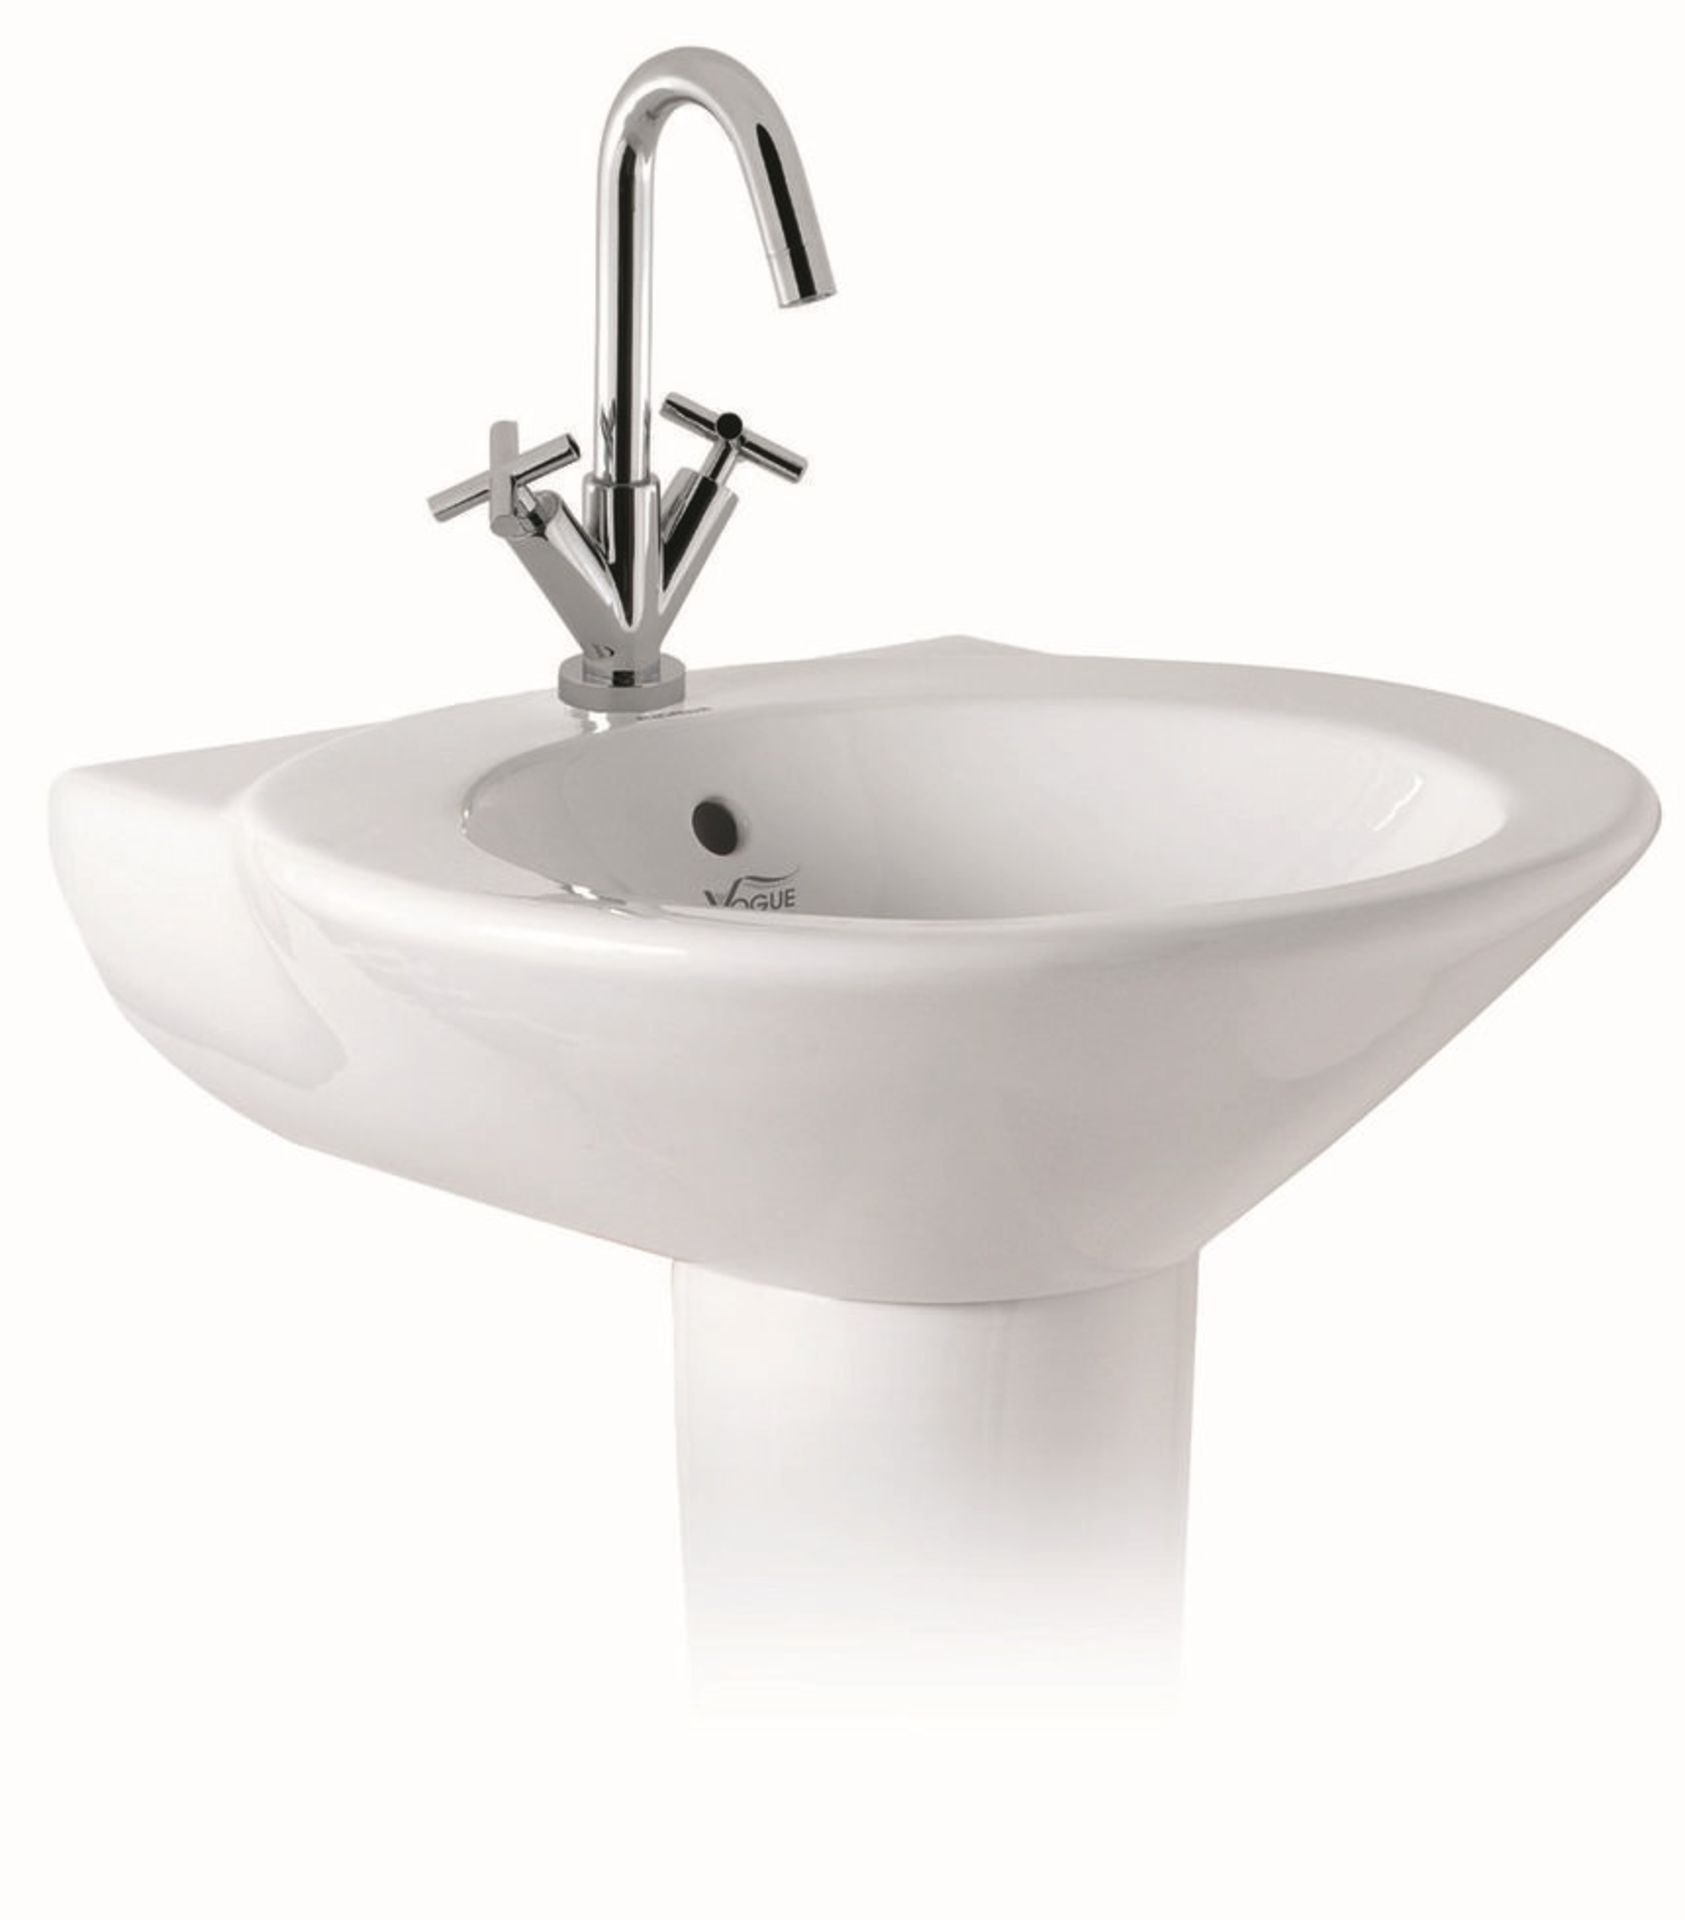 20 x Vogue Bathrooms TEFELI Single Tap Hole SINK BASINS with Pedestals - 550mm Width - Brand New and - Image 2 of 2